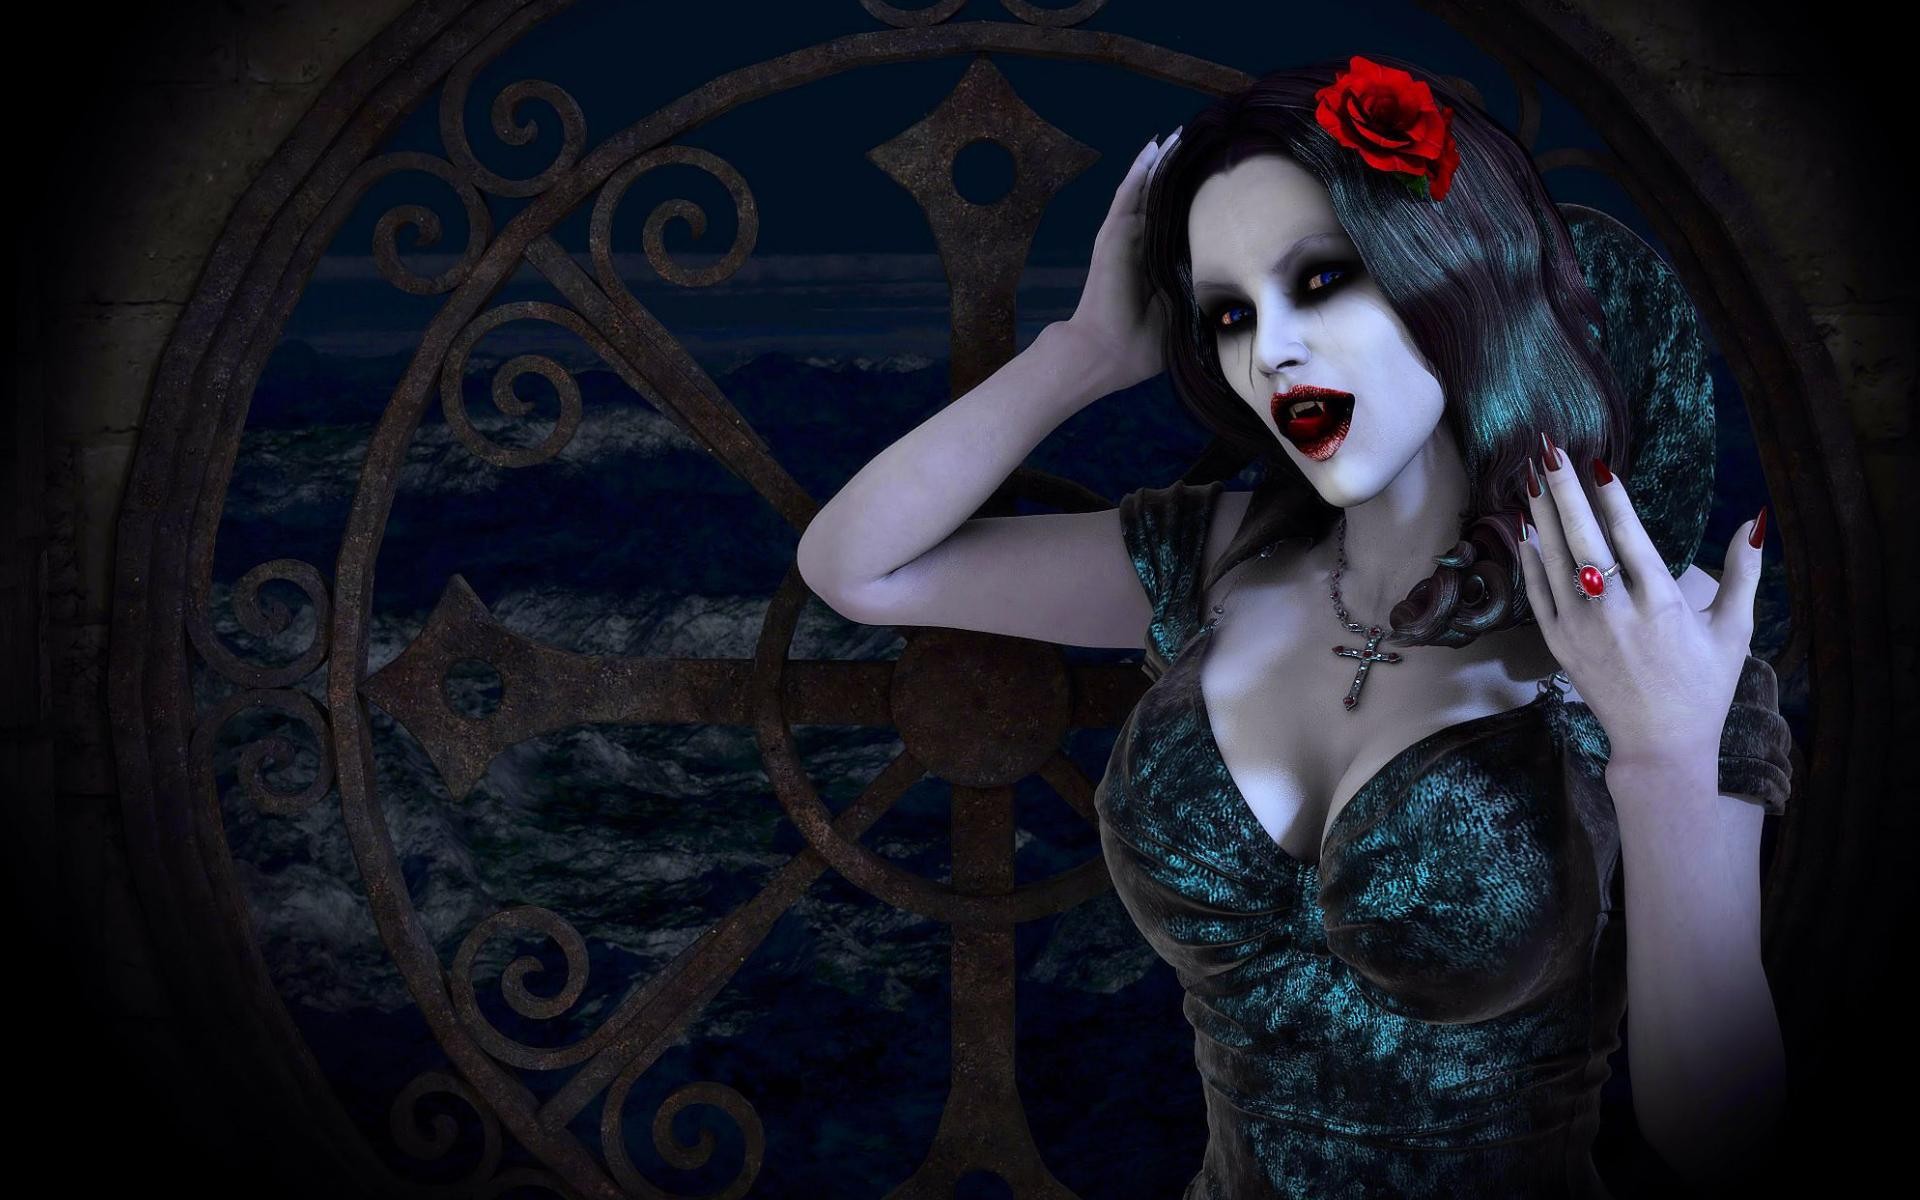 General 1920x1200 CGI vampires artwork women painted nails tongues flower in hair boobs big boobs cleavage red nails looking at viewer